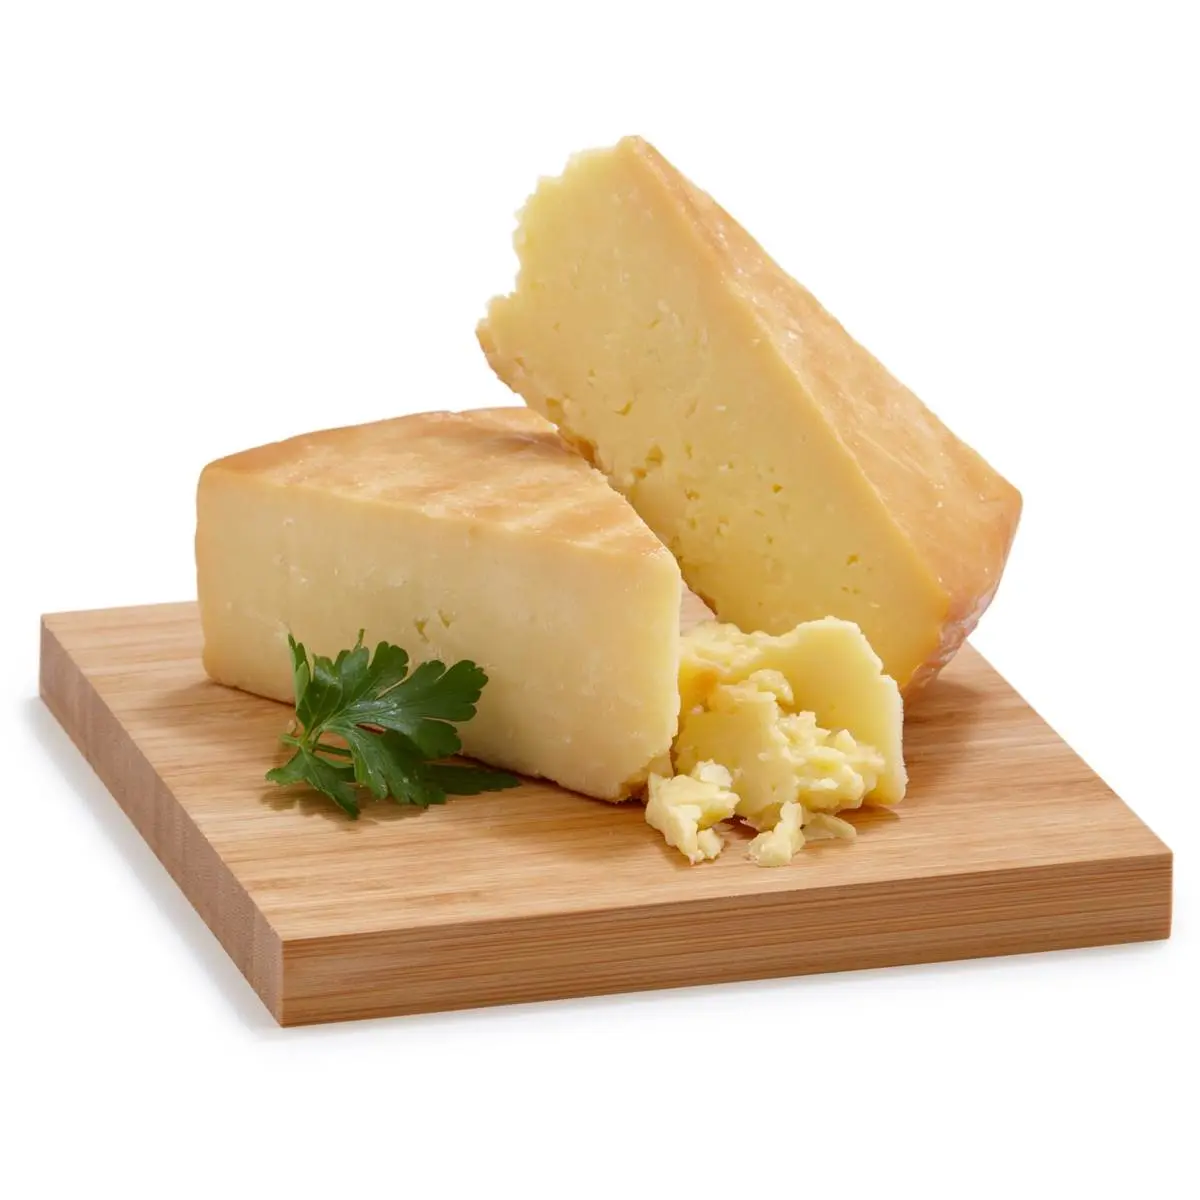 king island smoked cheddar - What are the ingredients in King Island smoked cheddar cheese